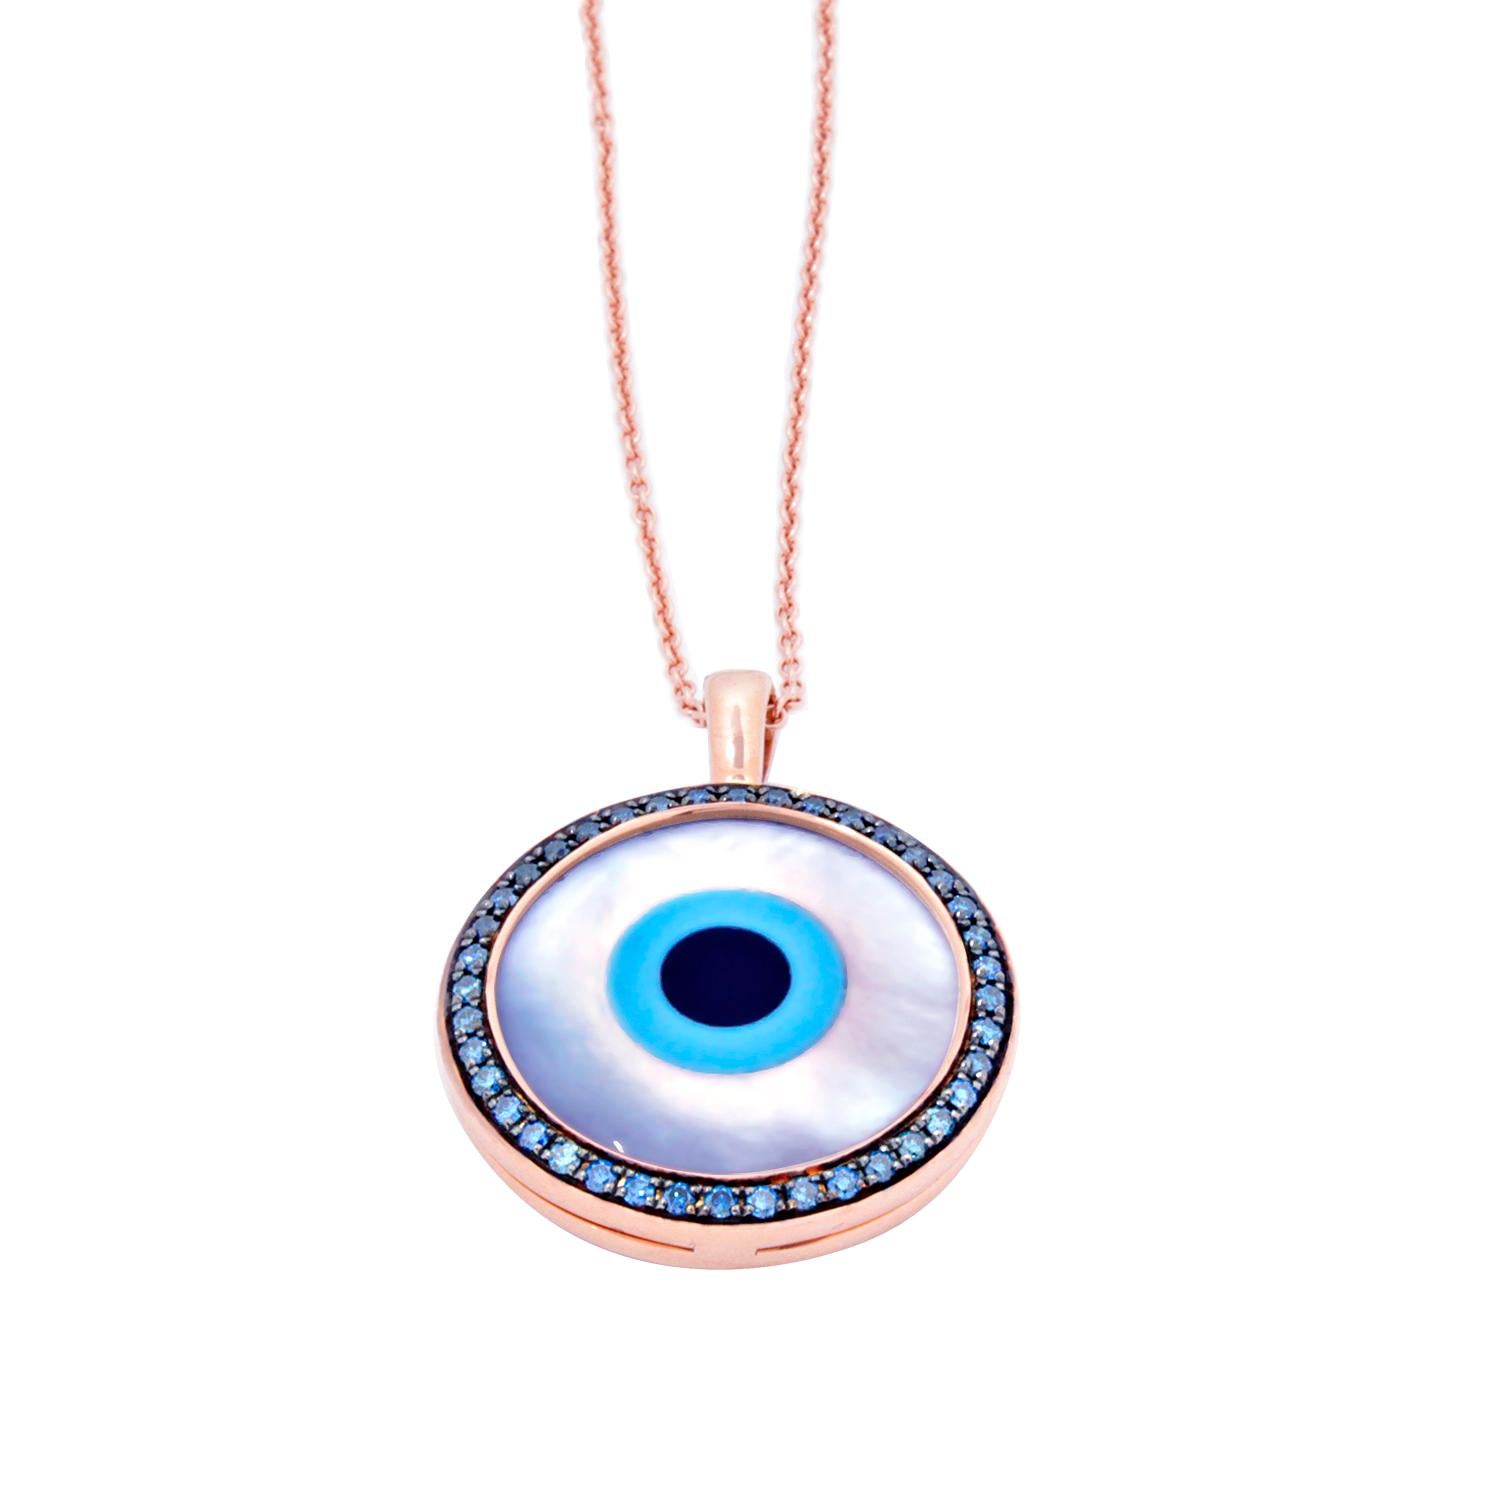 The myth of the evil eye has intrigued people for thousands of years! Believed the bring the wearer good luck, the ‘Evil Eye Collection’ is delightfully handcrafted in 18 carat gold with diamonds and turquoise inlay, reminiscent of the Greek